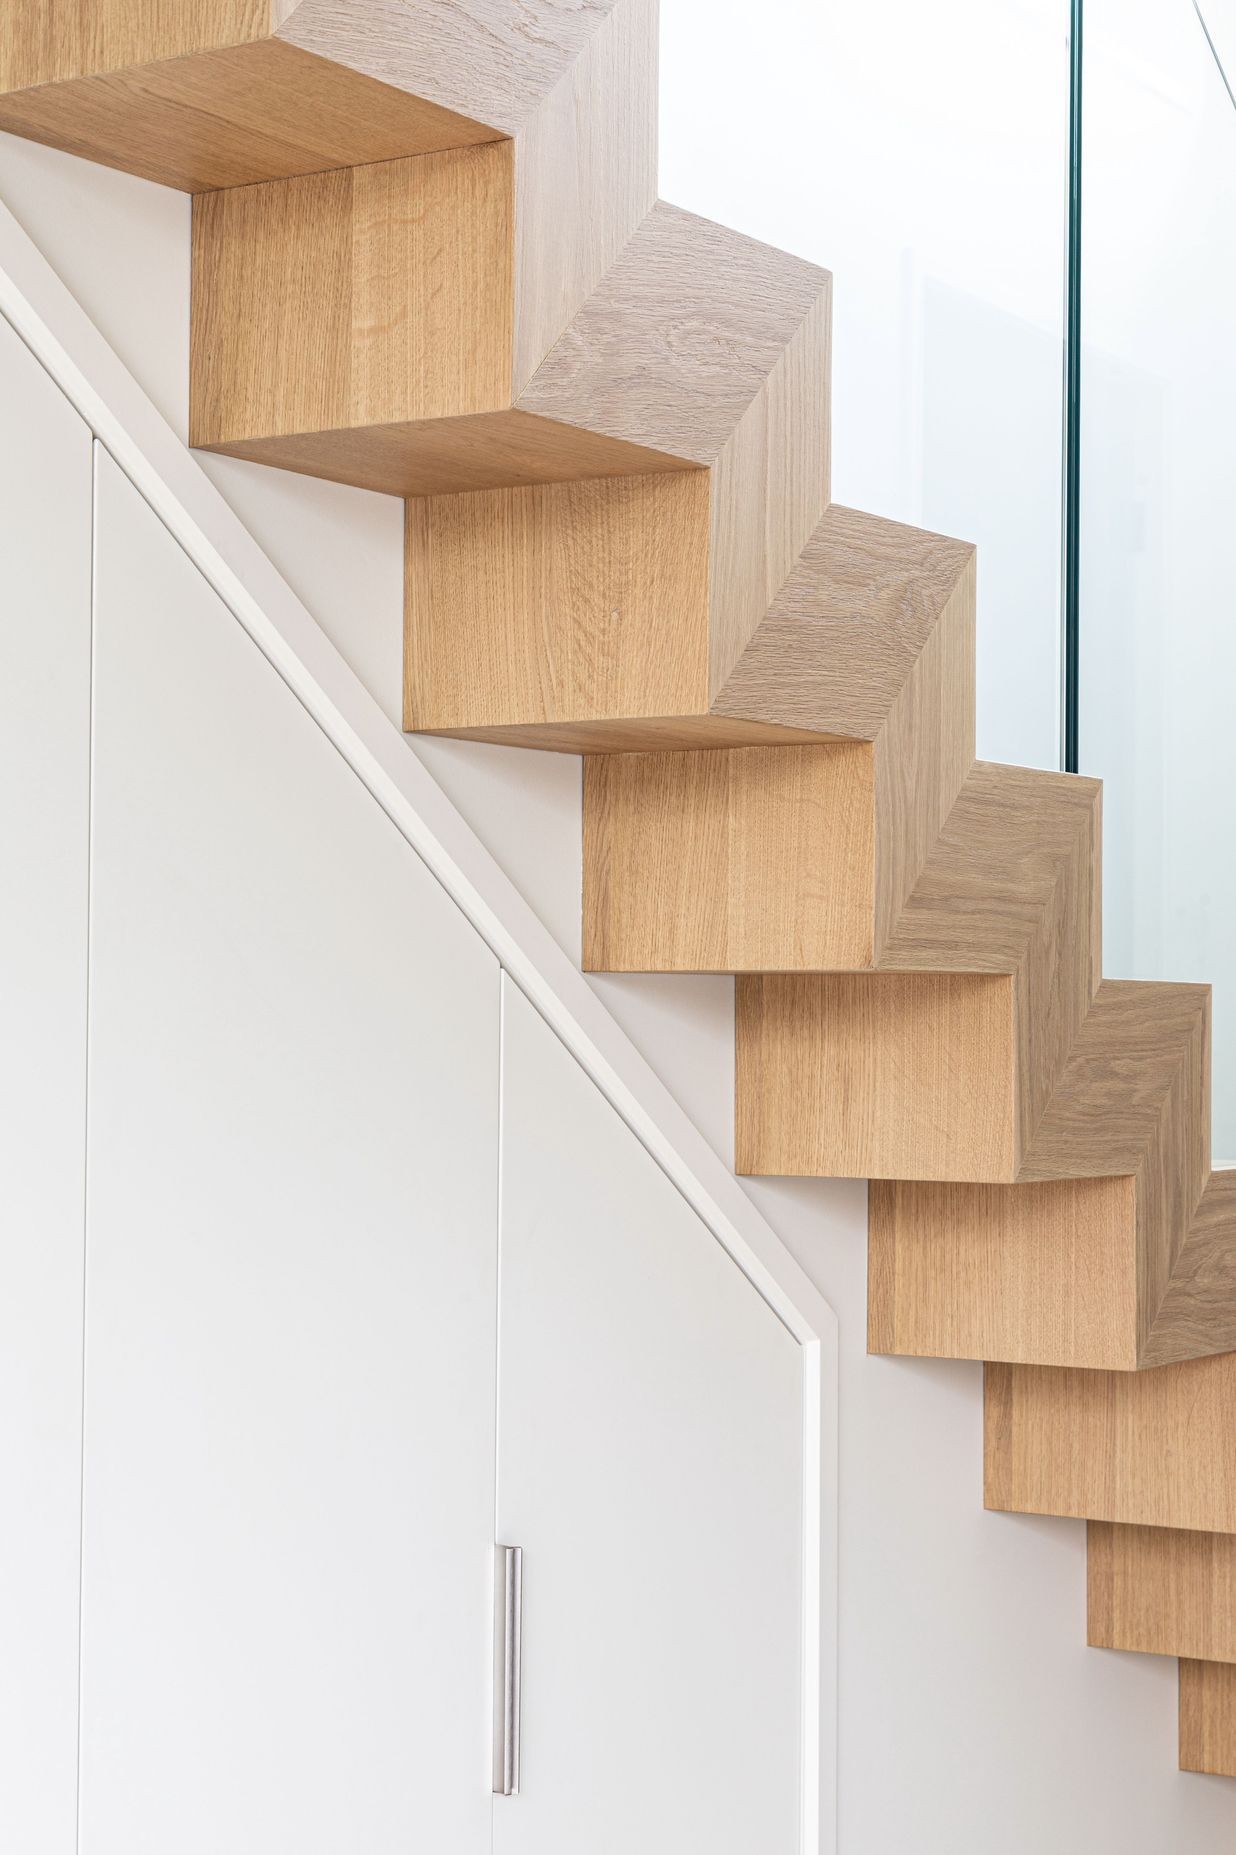 The geometric detailing of the stair has a strong sculptural quality.